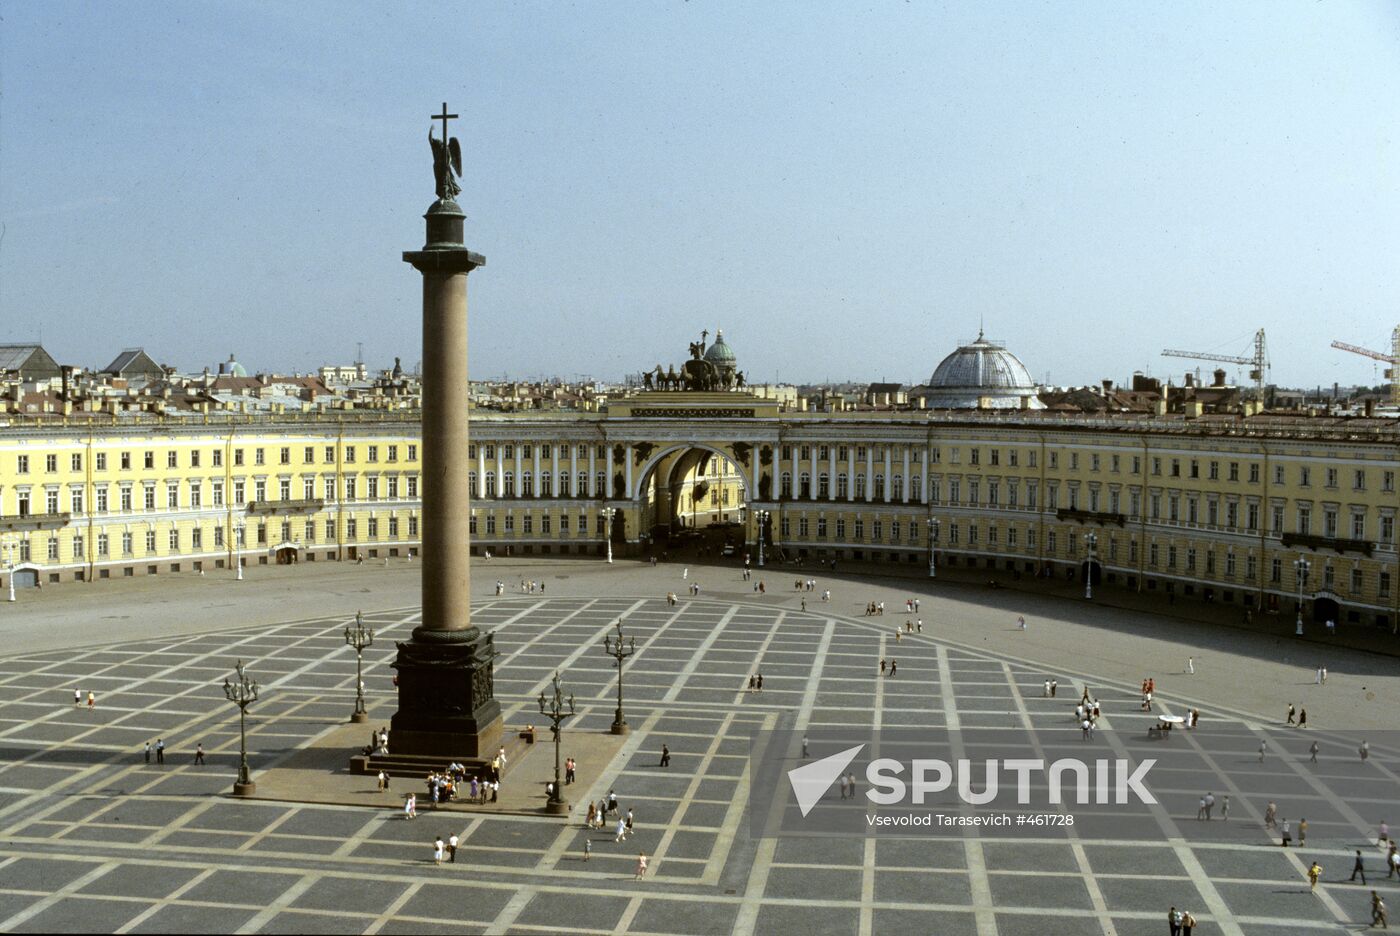 Architectural ensemble of Palace Square